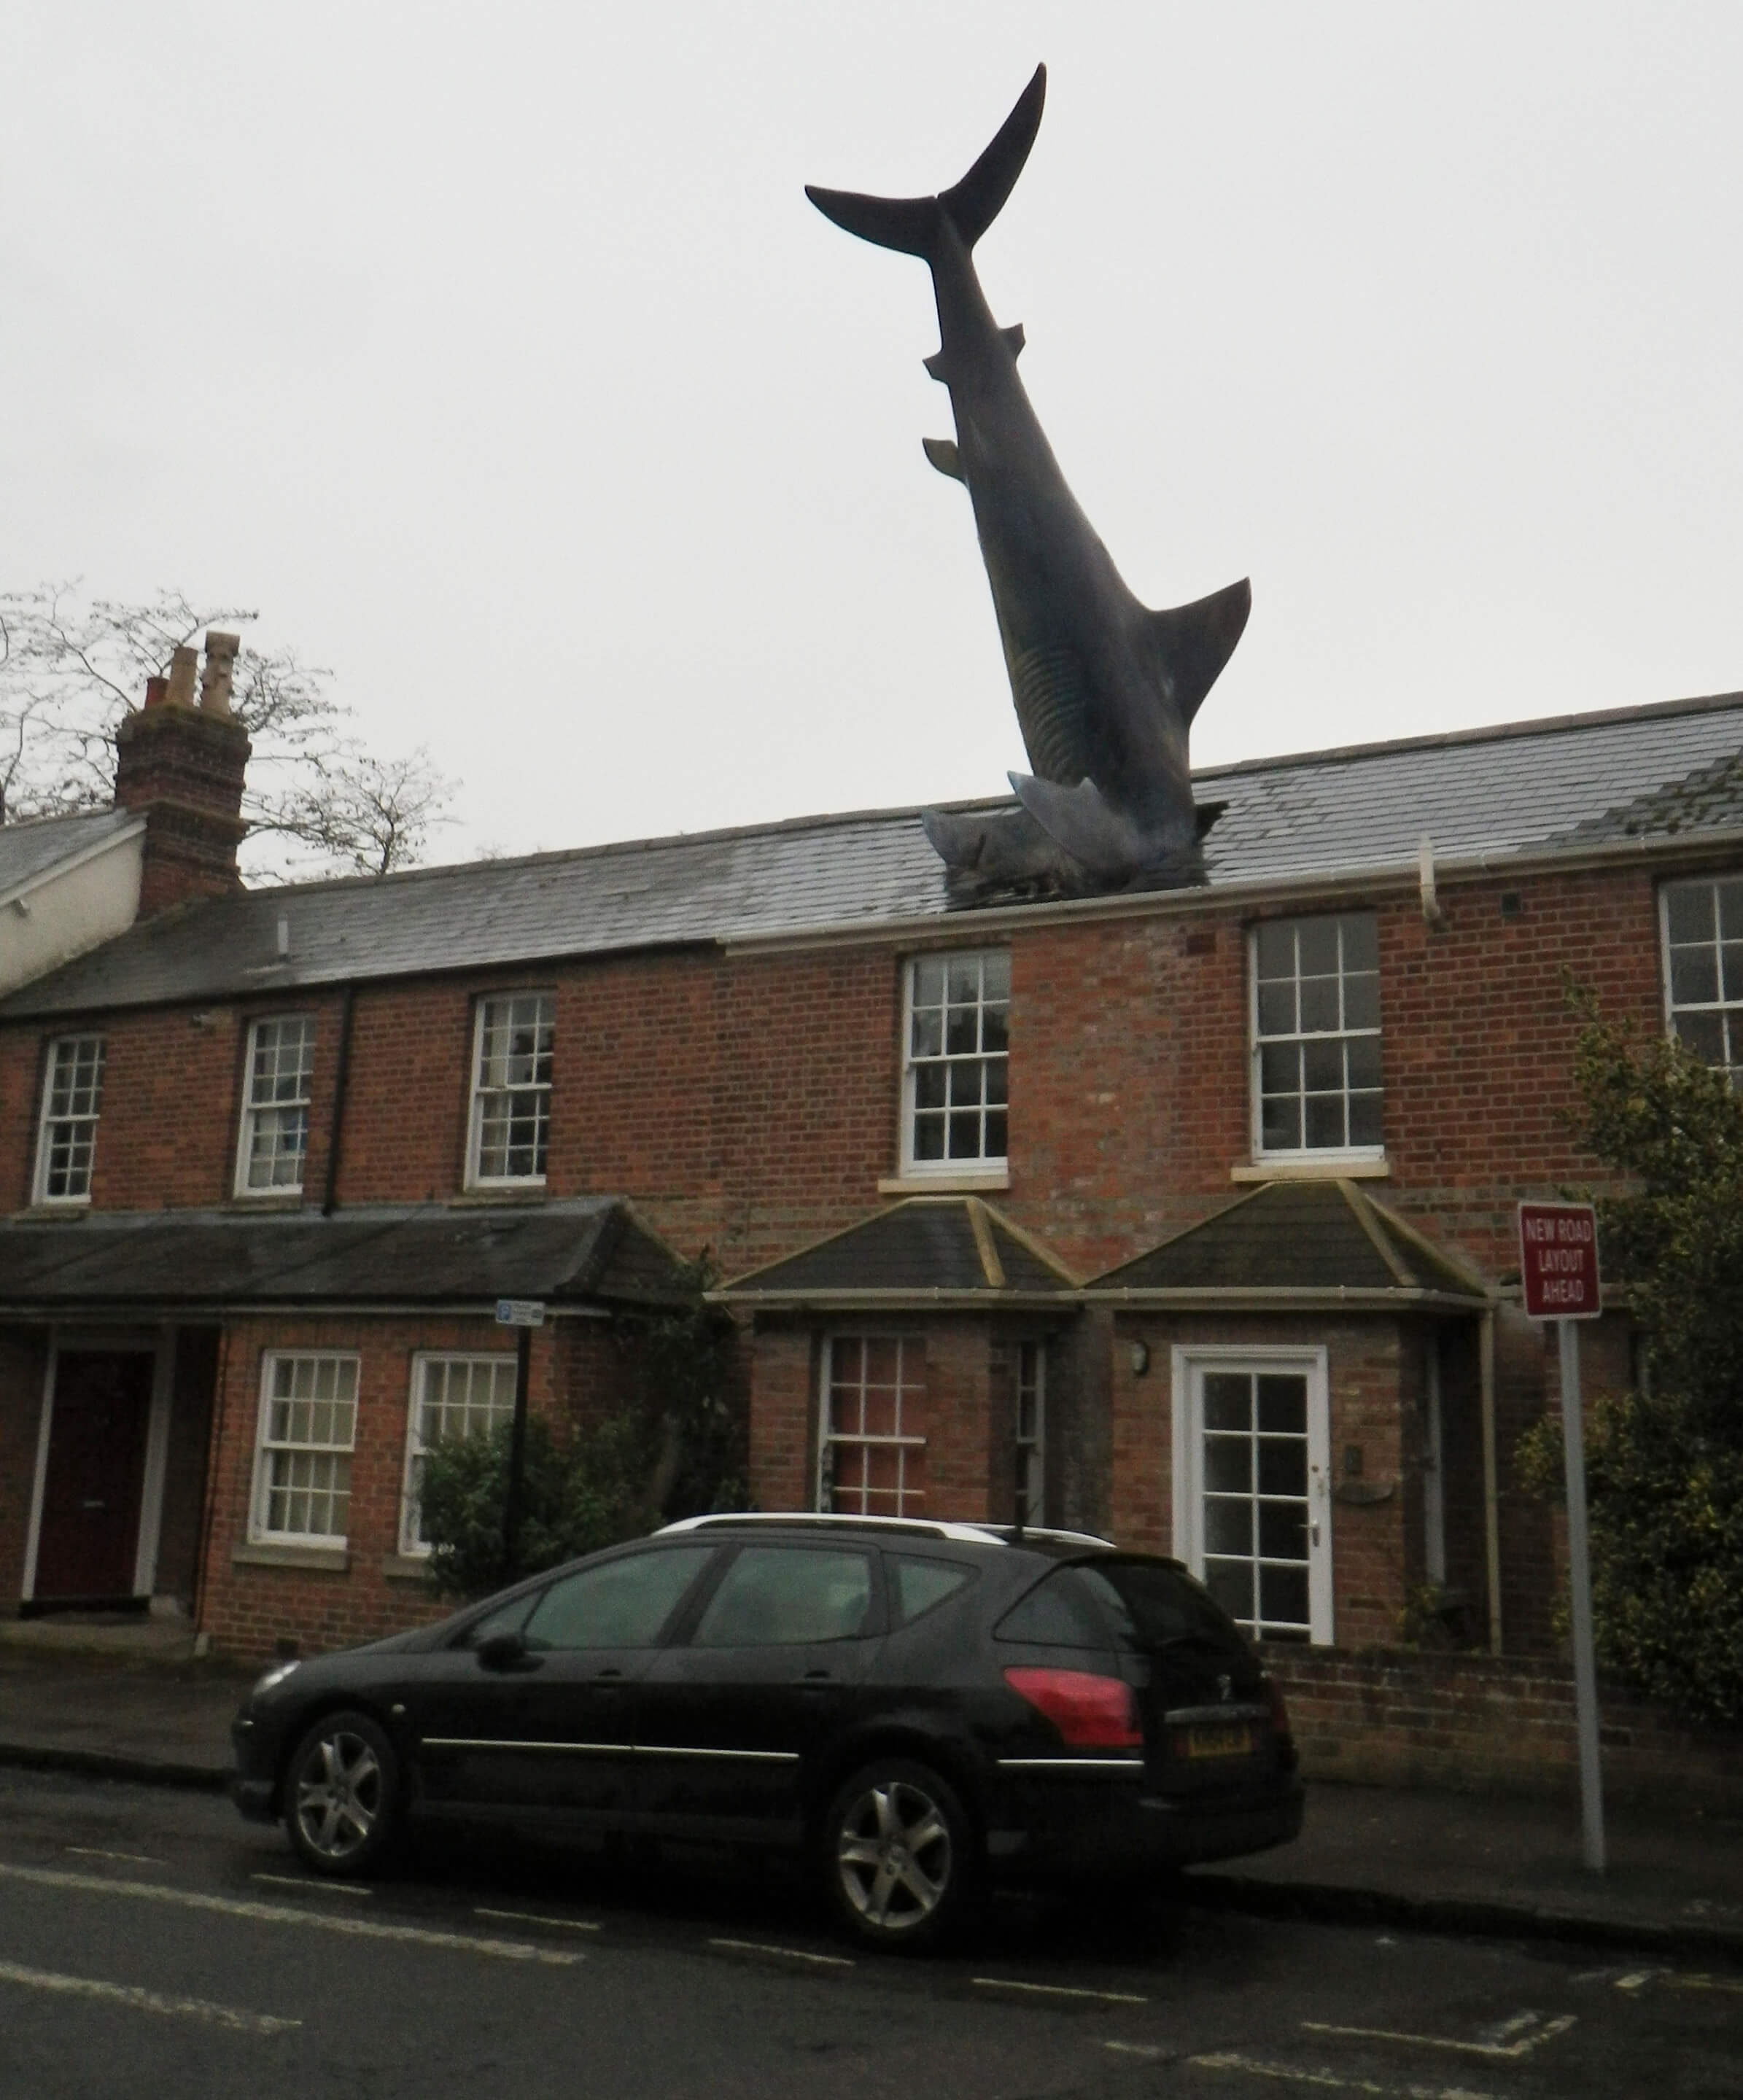 a shark sculpture embedded into the roof of a house